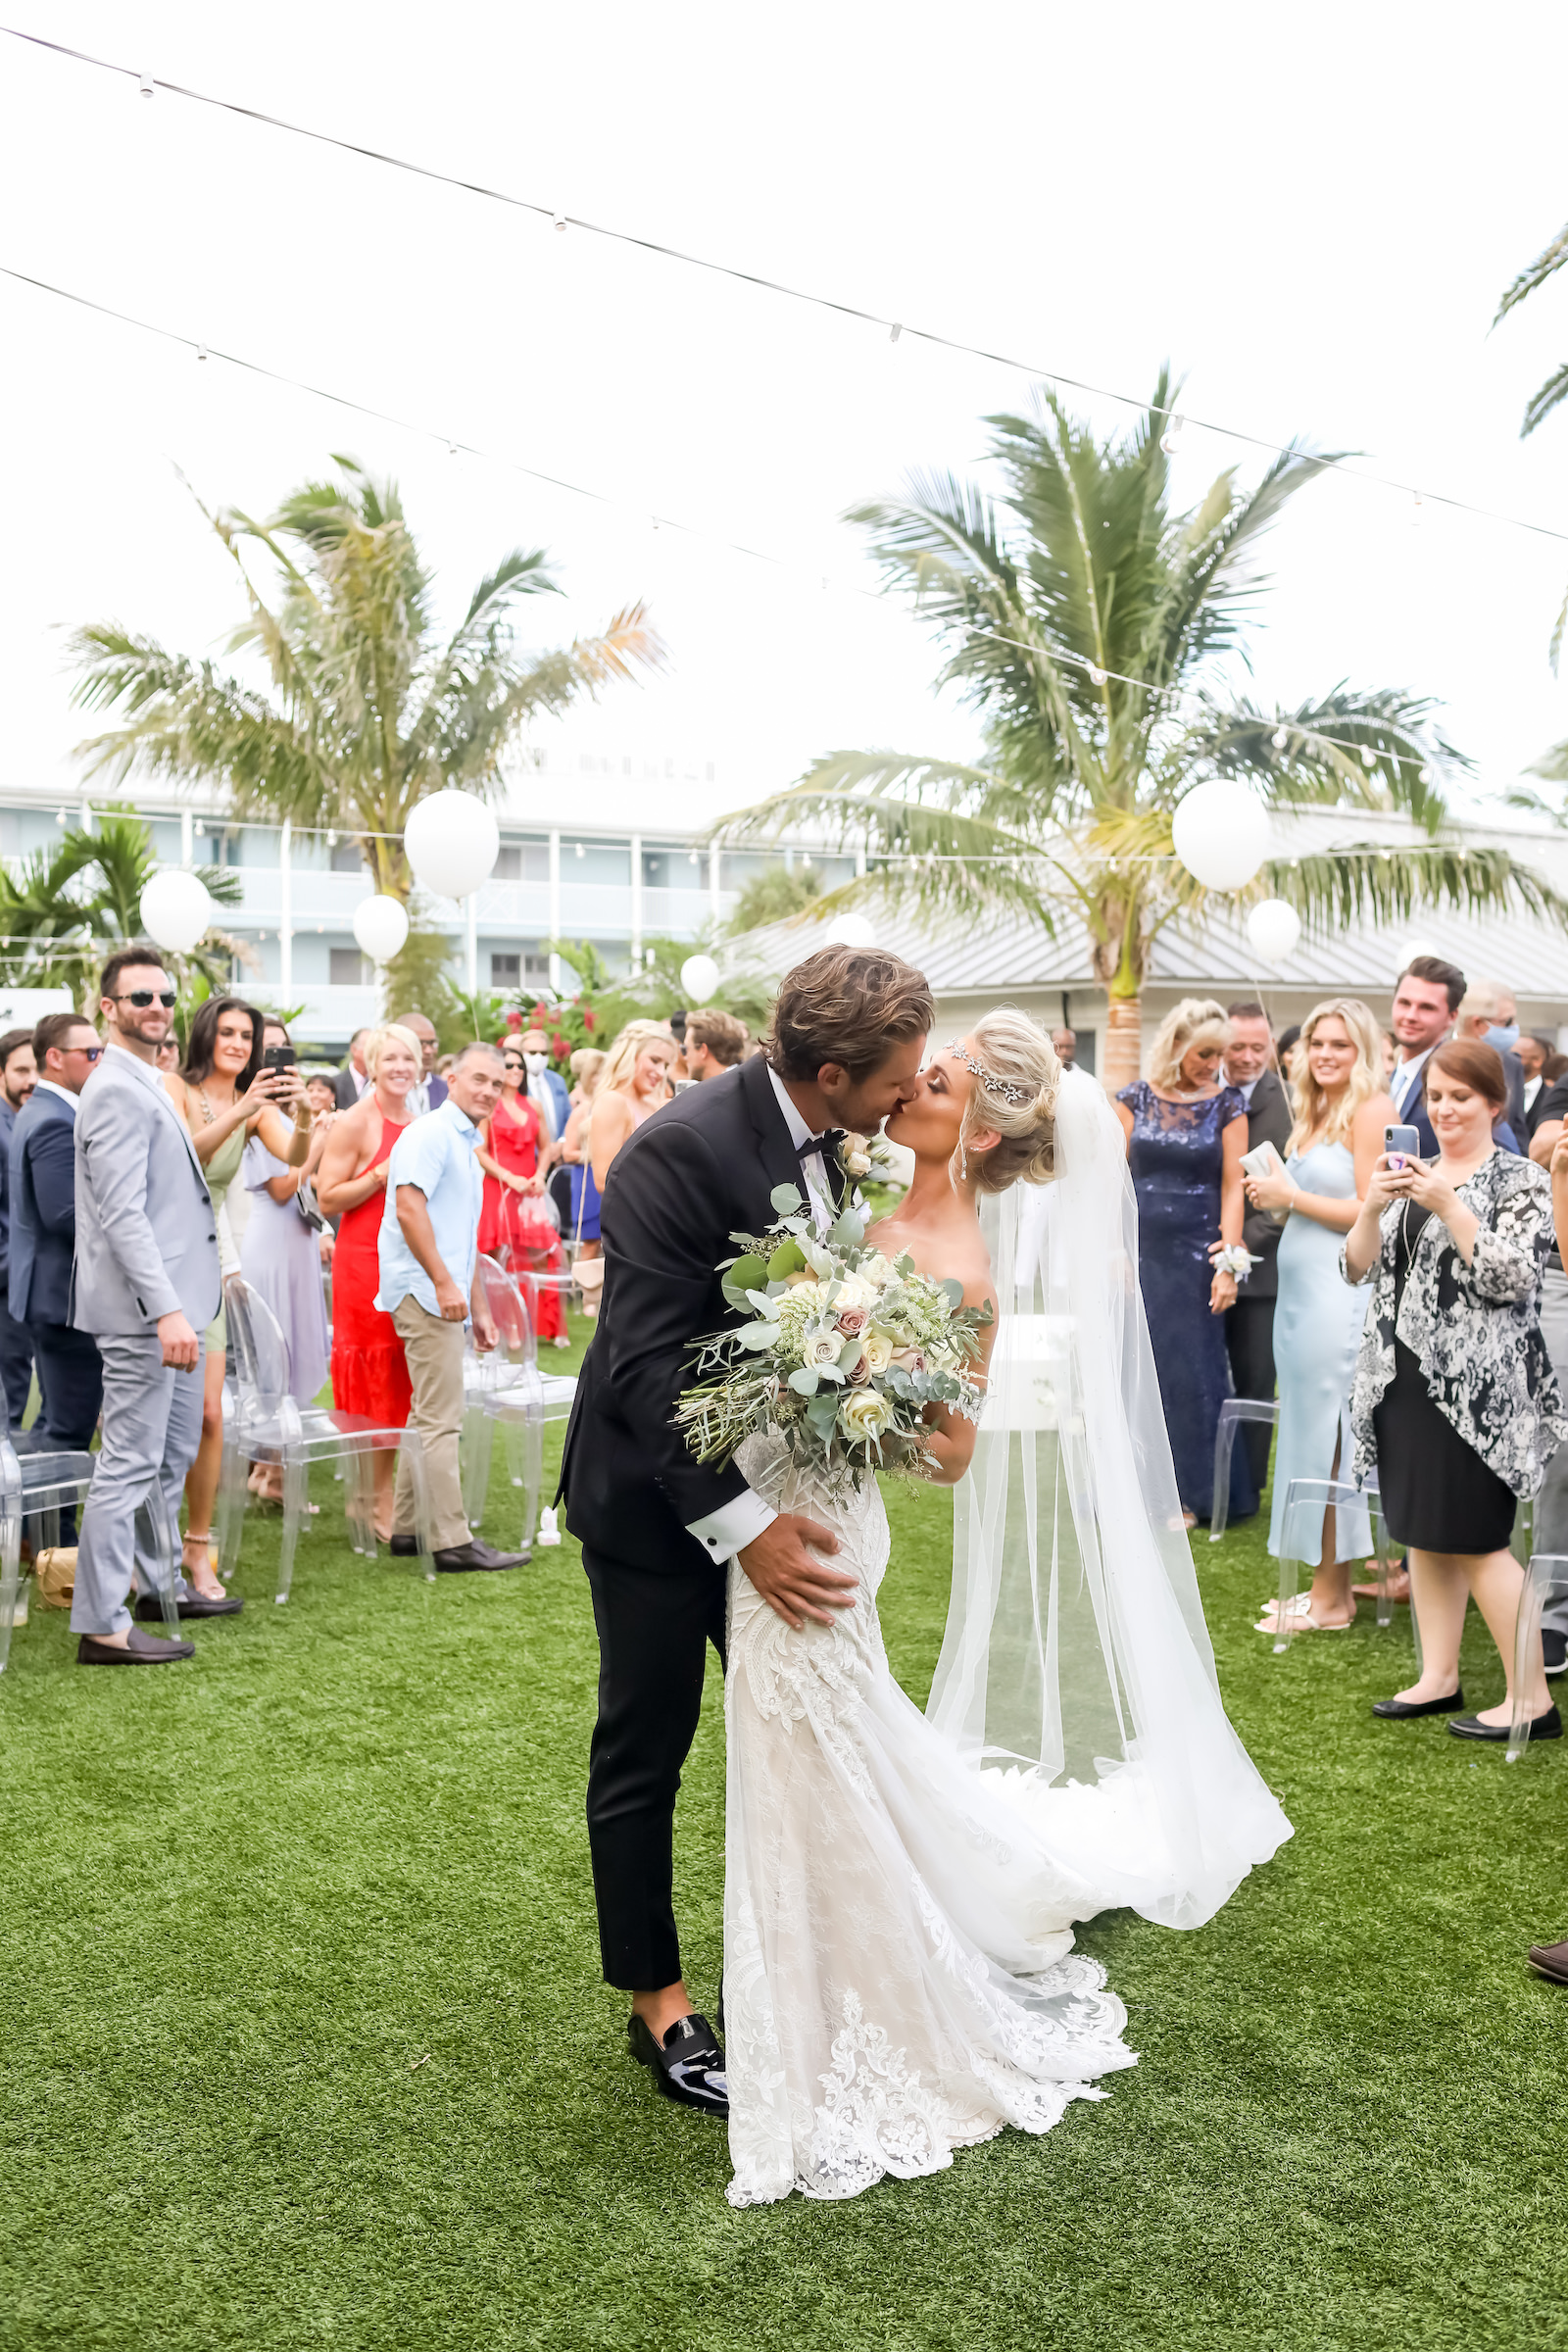 Florida Bride and Groom Kiss At End of the Aisle, Surrounded by Family and Friends on Acrylic Ghost Chairs, Tropical Elegant Inspired Floral Arrangements with Whtie and Ivory Flowers with Greenery | Sarasota Wedding Planner Kelly Kennedy Weddings | Florida Wedding Photographer Lifelong Photography Studio